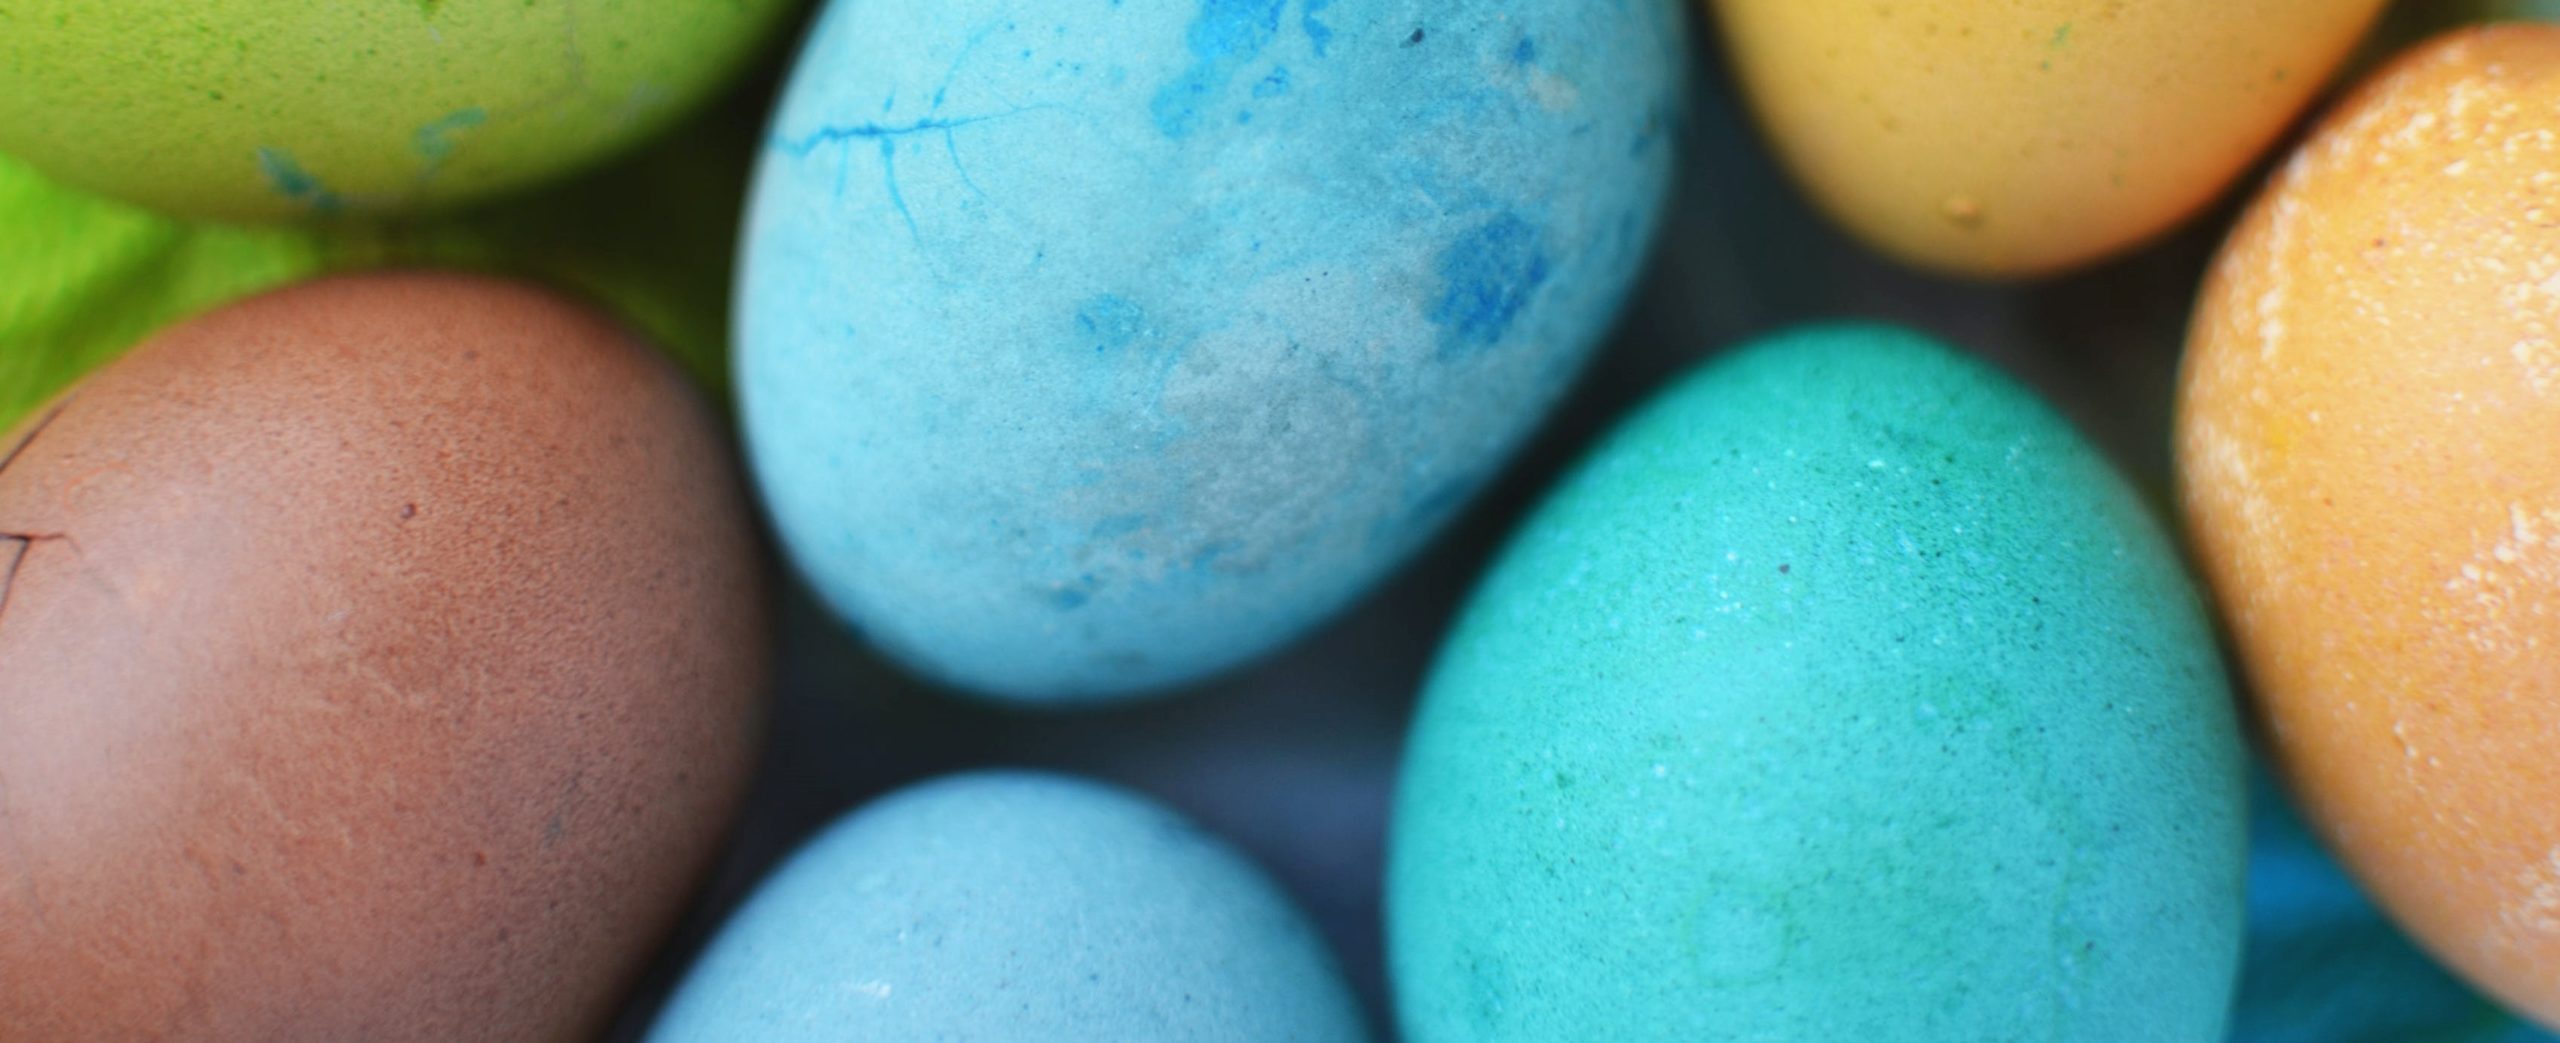 Brightly painted eggs for Easter.